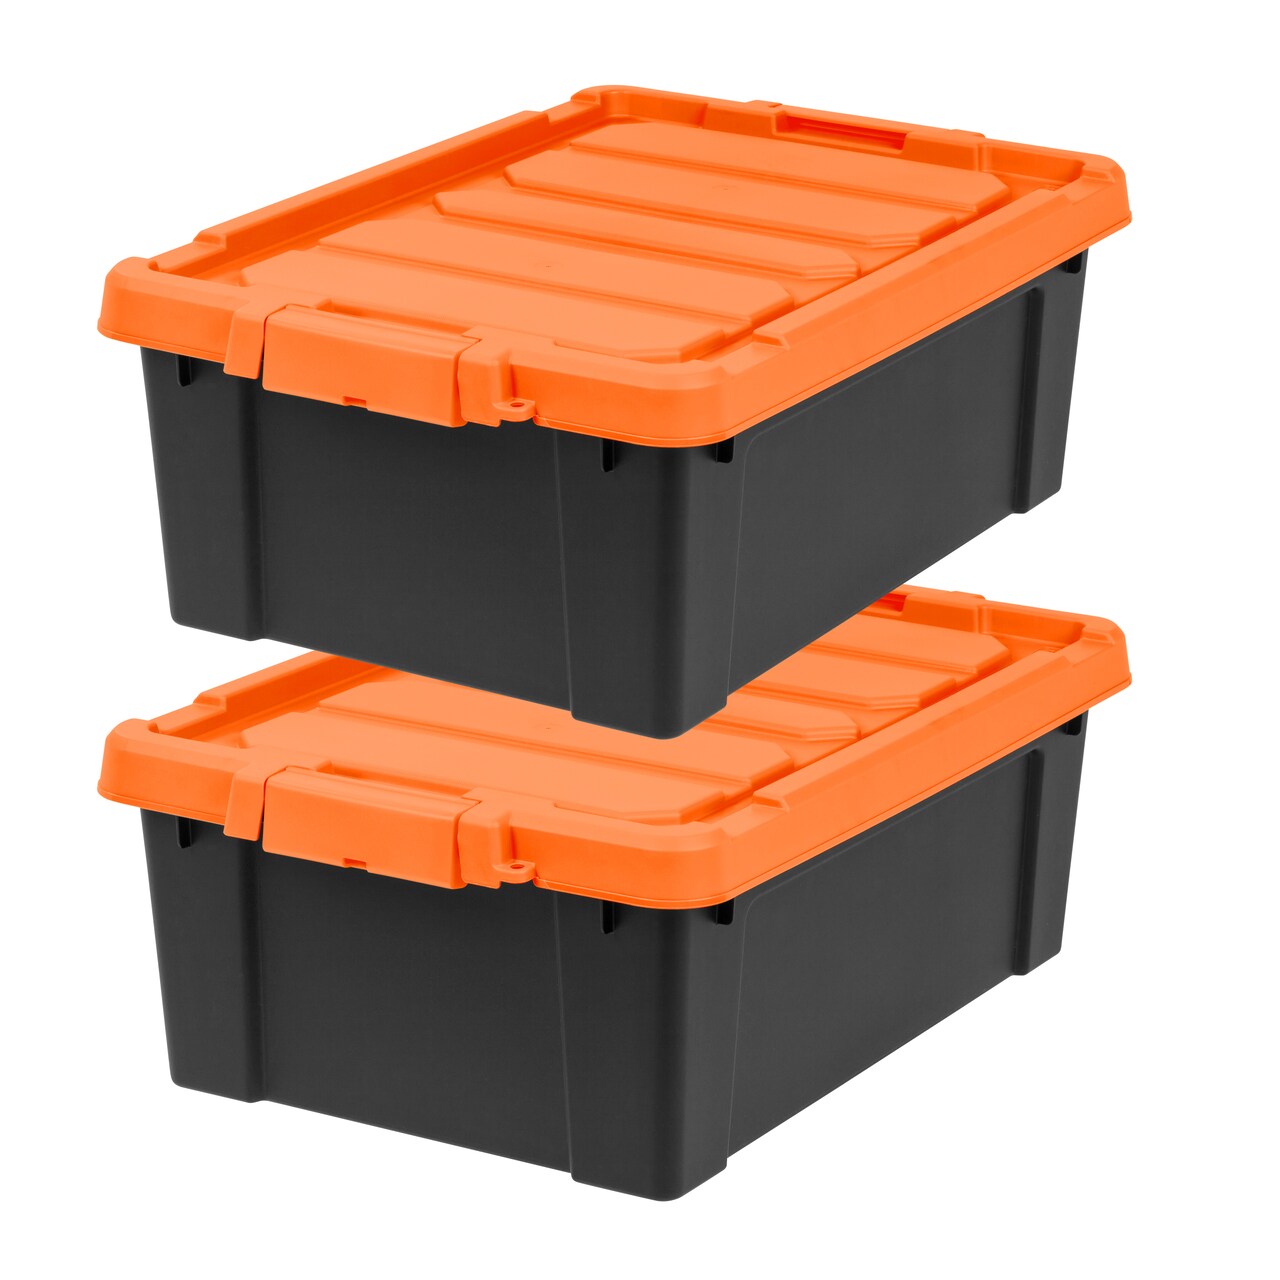 IRIS USA Heavy-Duty Plastic Storage Bins, Store-It-All Container Totes with  Durable Lid and Secure Latching Buckles, Black/Orange